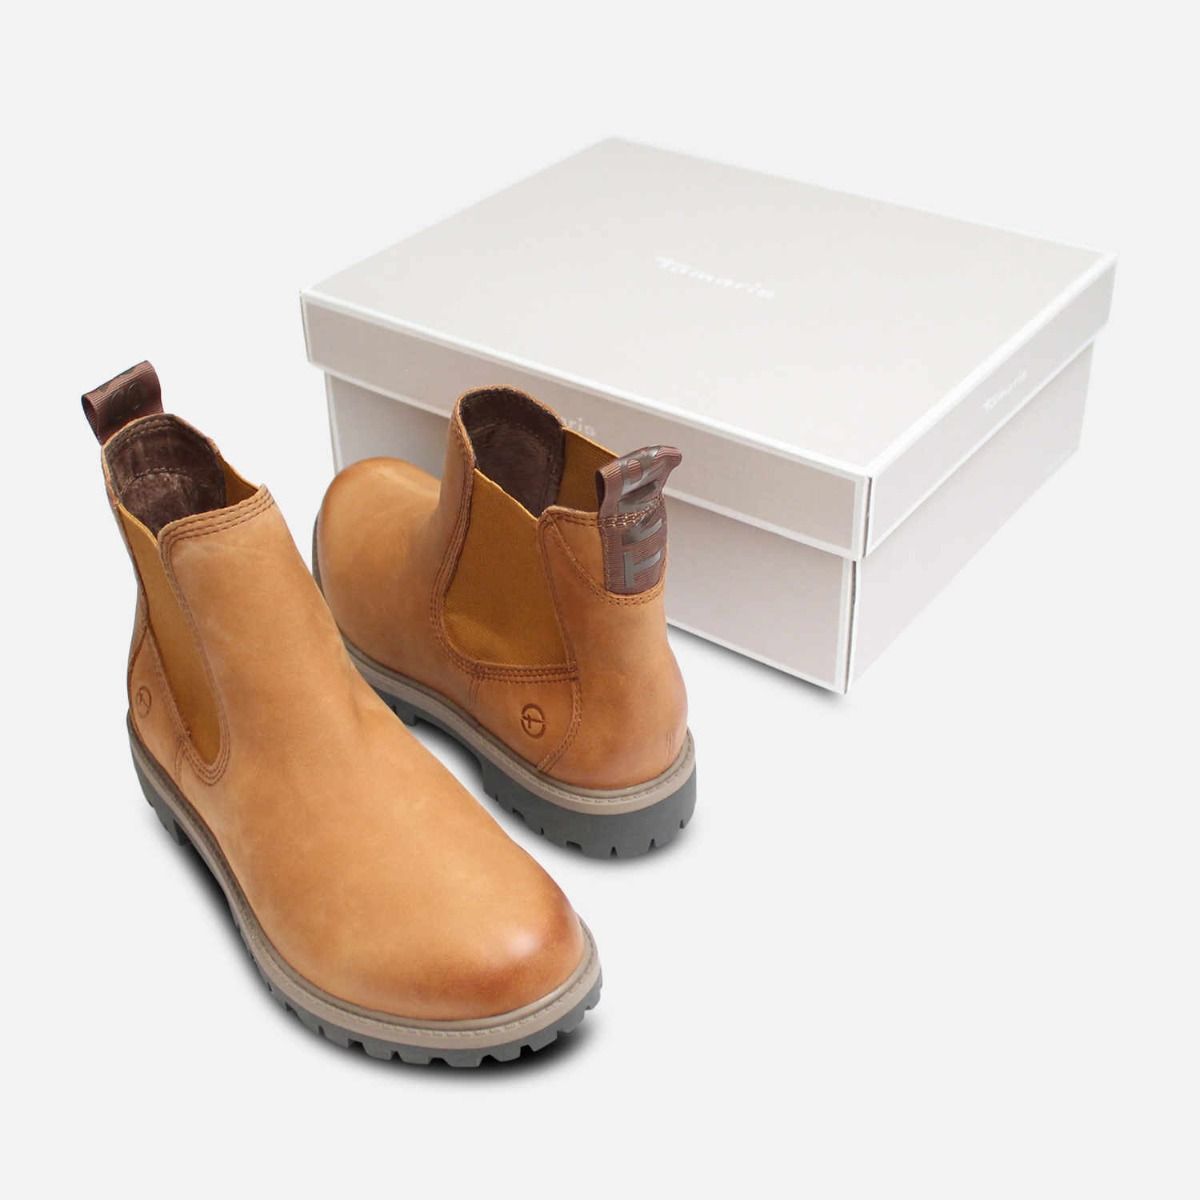 Tamaris Slip On Beige Chelsea Boots with Rubber